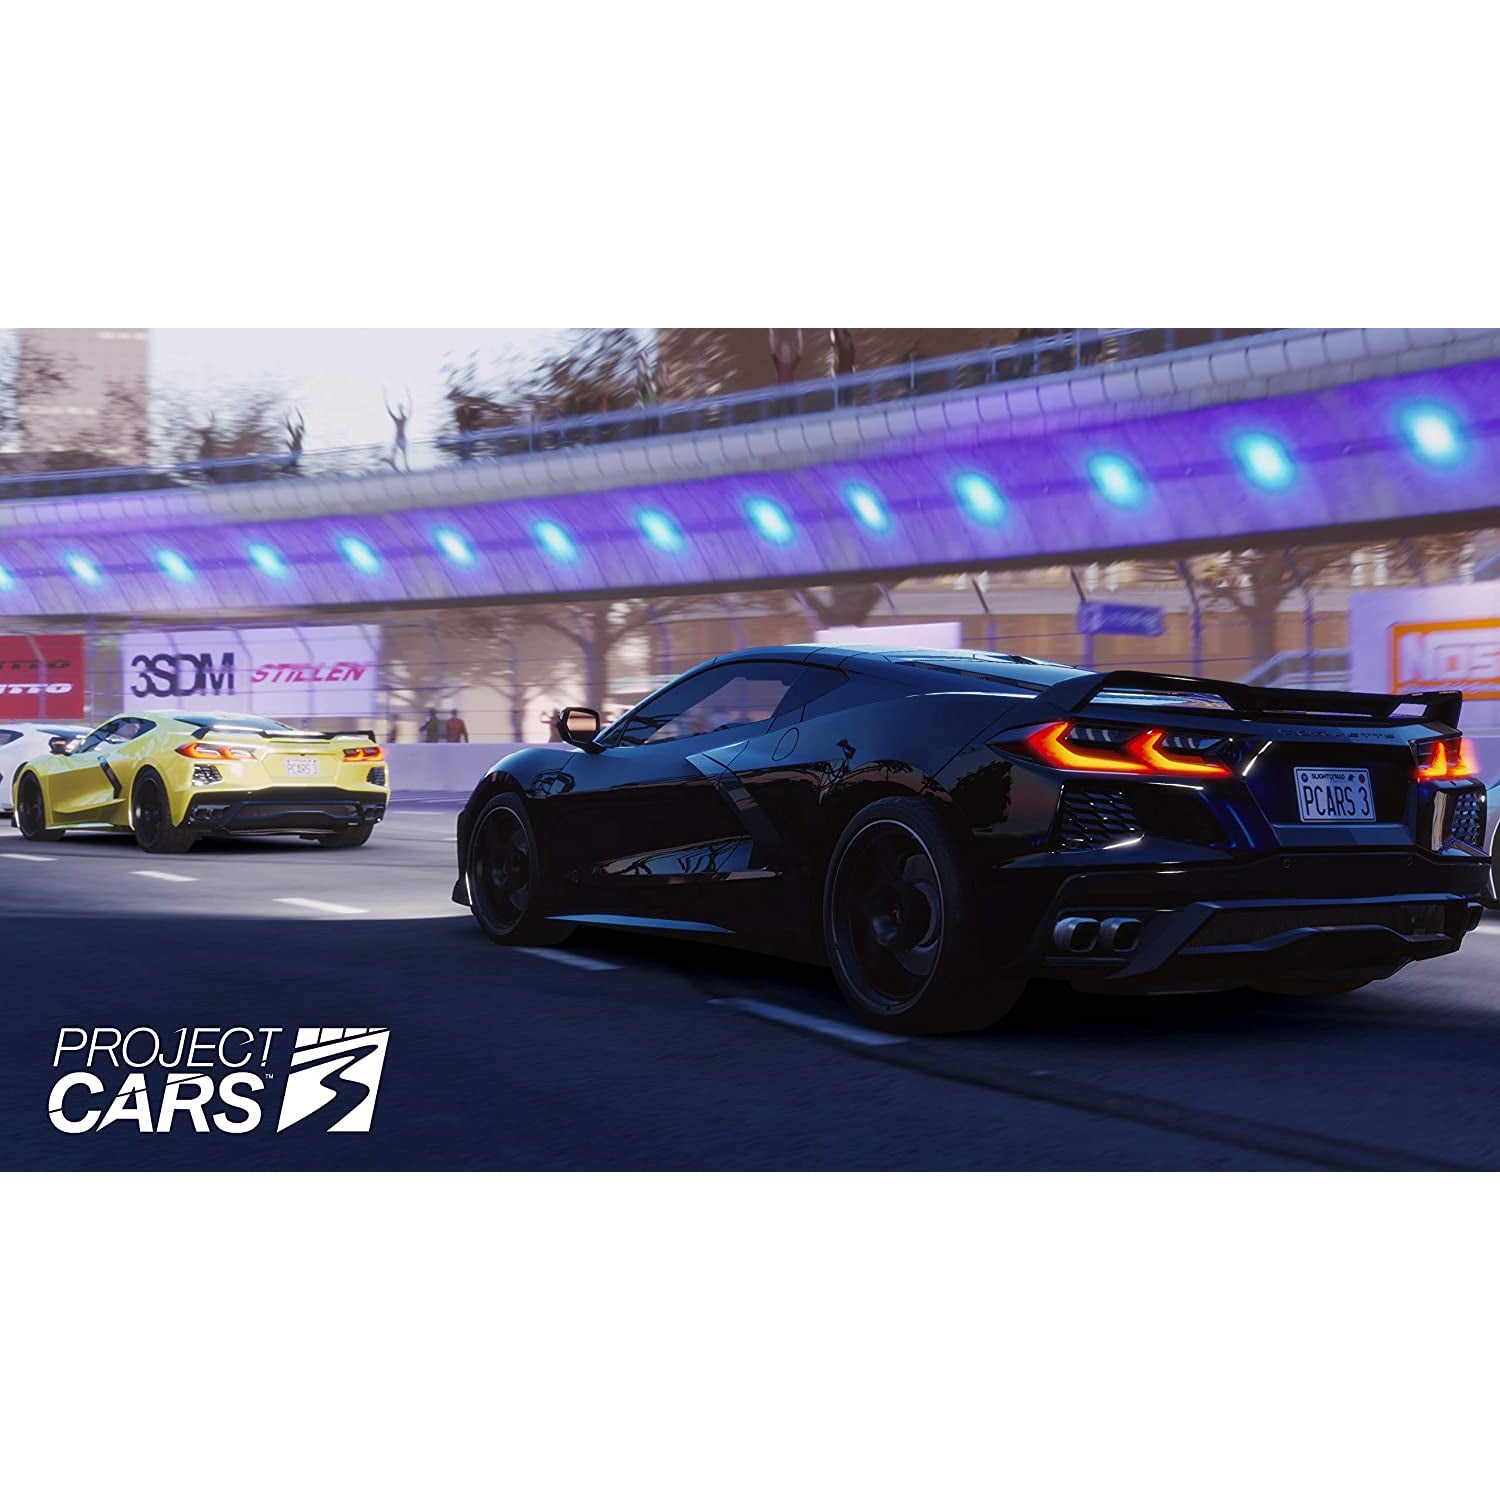 Project Cars 3 (PS4), Video Game for Playstation 4